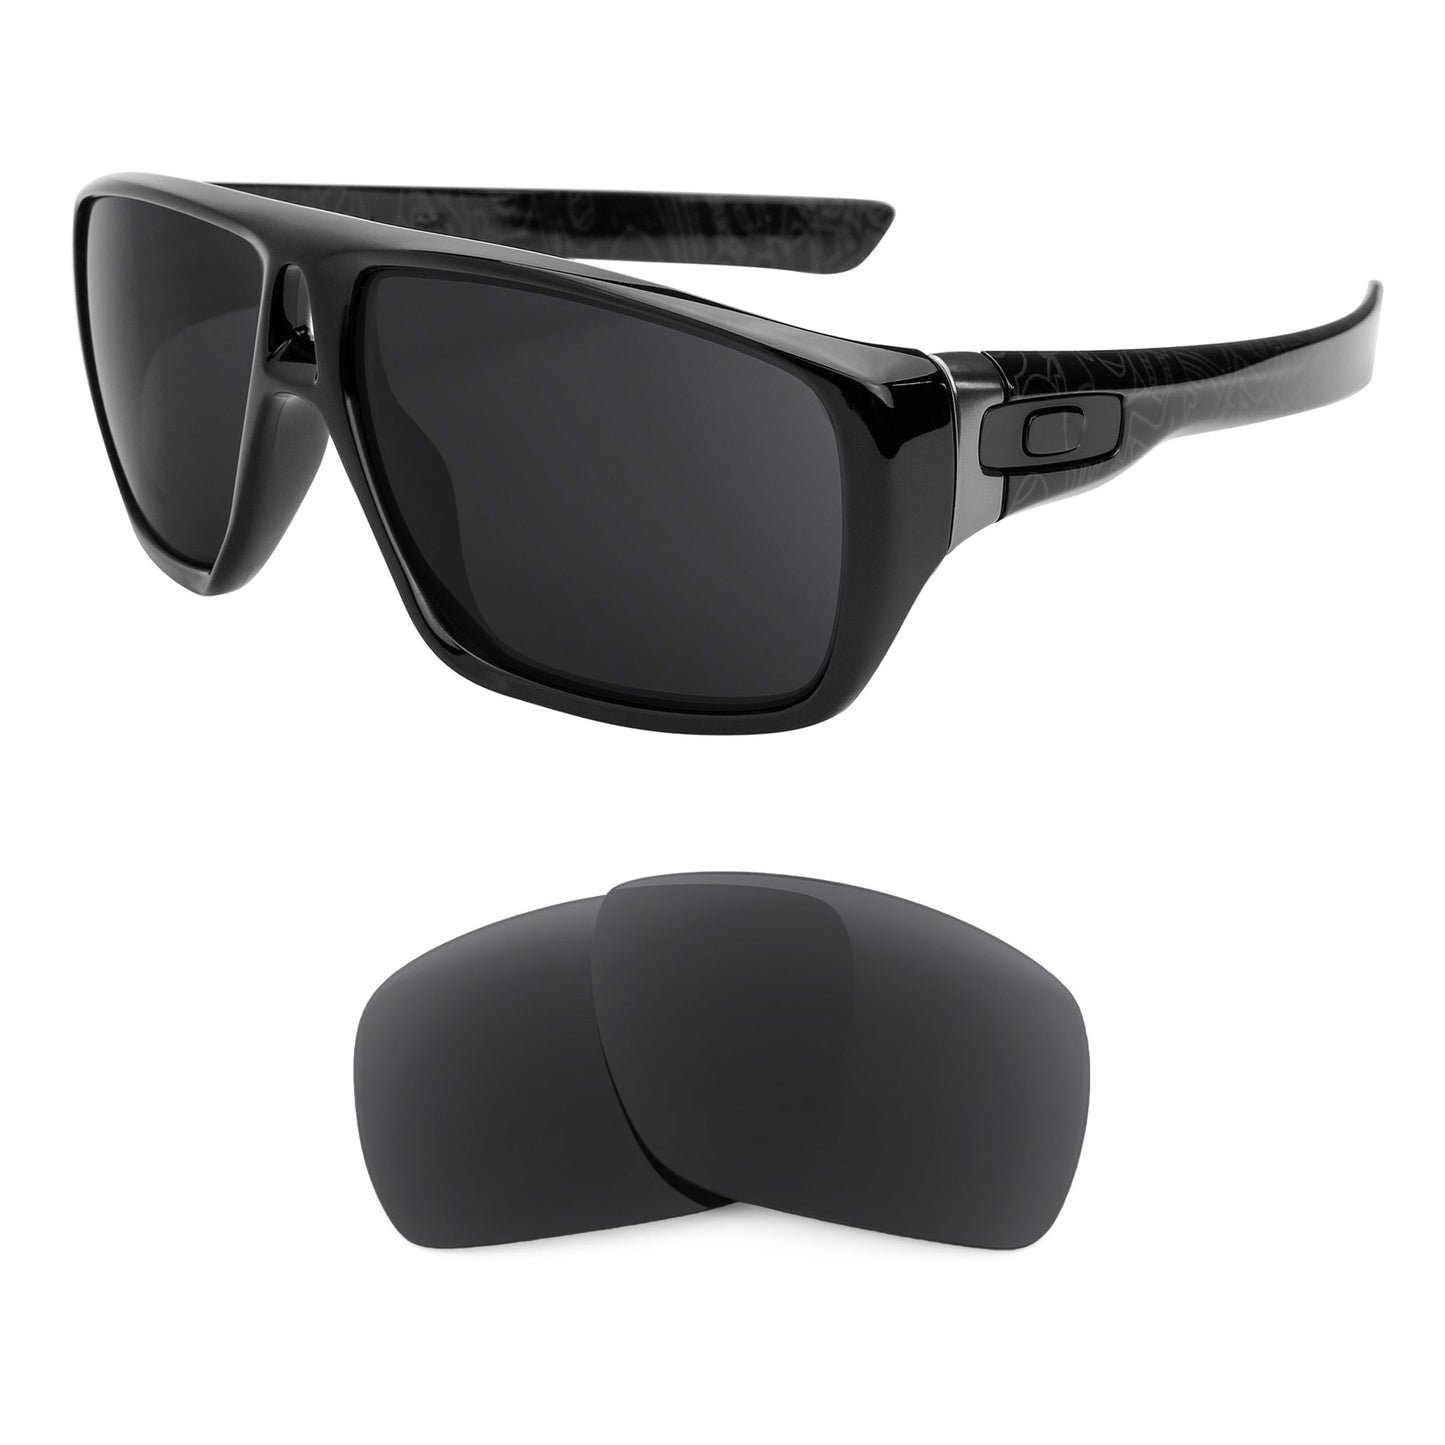 Oakley Dispatch 1 sunglasses with replacement lenses